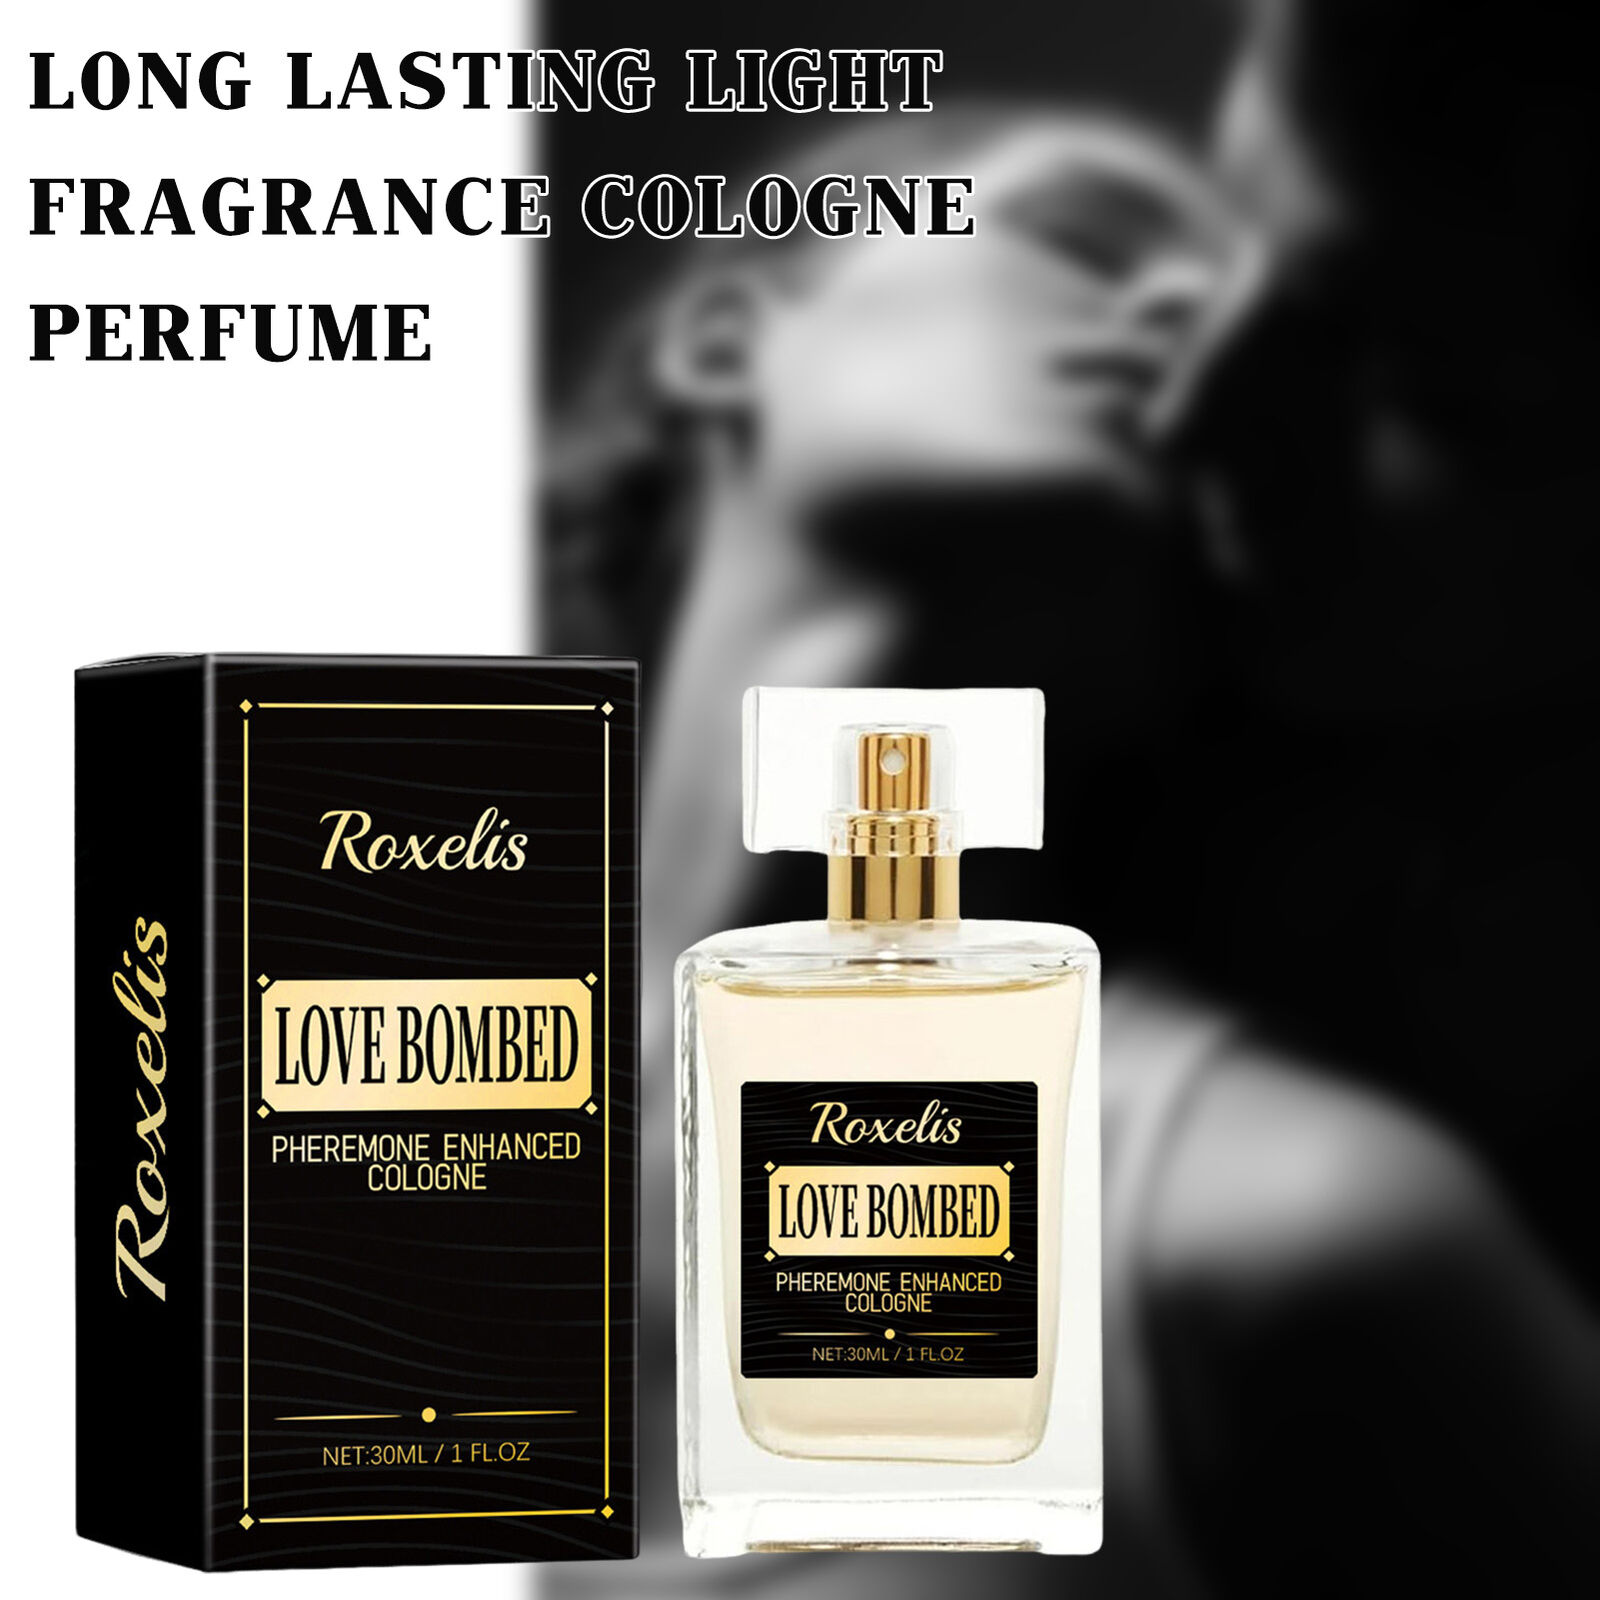 Love Bombed - Best Pheromone Cologne for Men Bold Attraction,Love Bombed Cologn